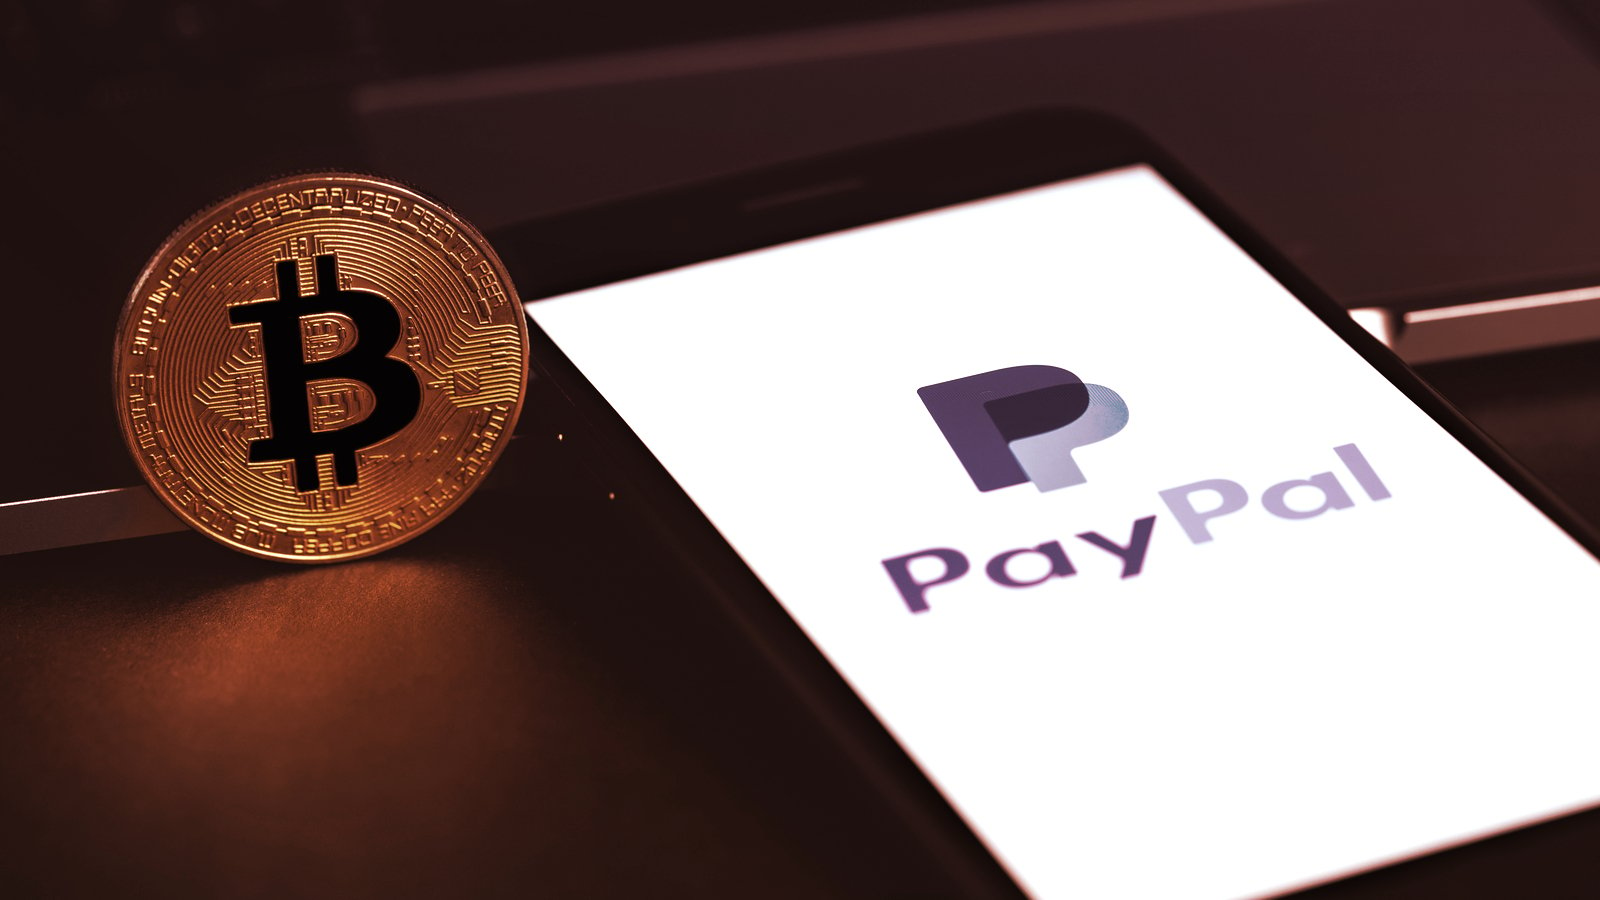 PayPal and Bitcoin. Image: Shutterstock